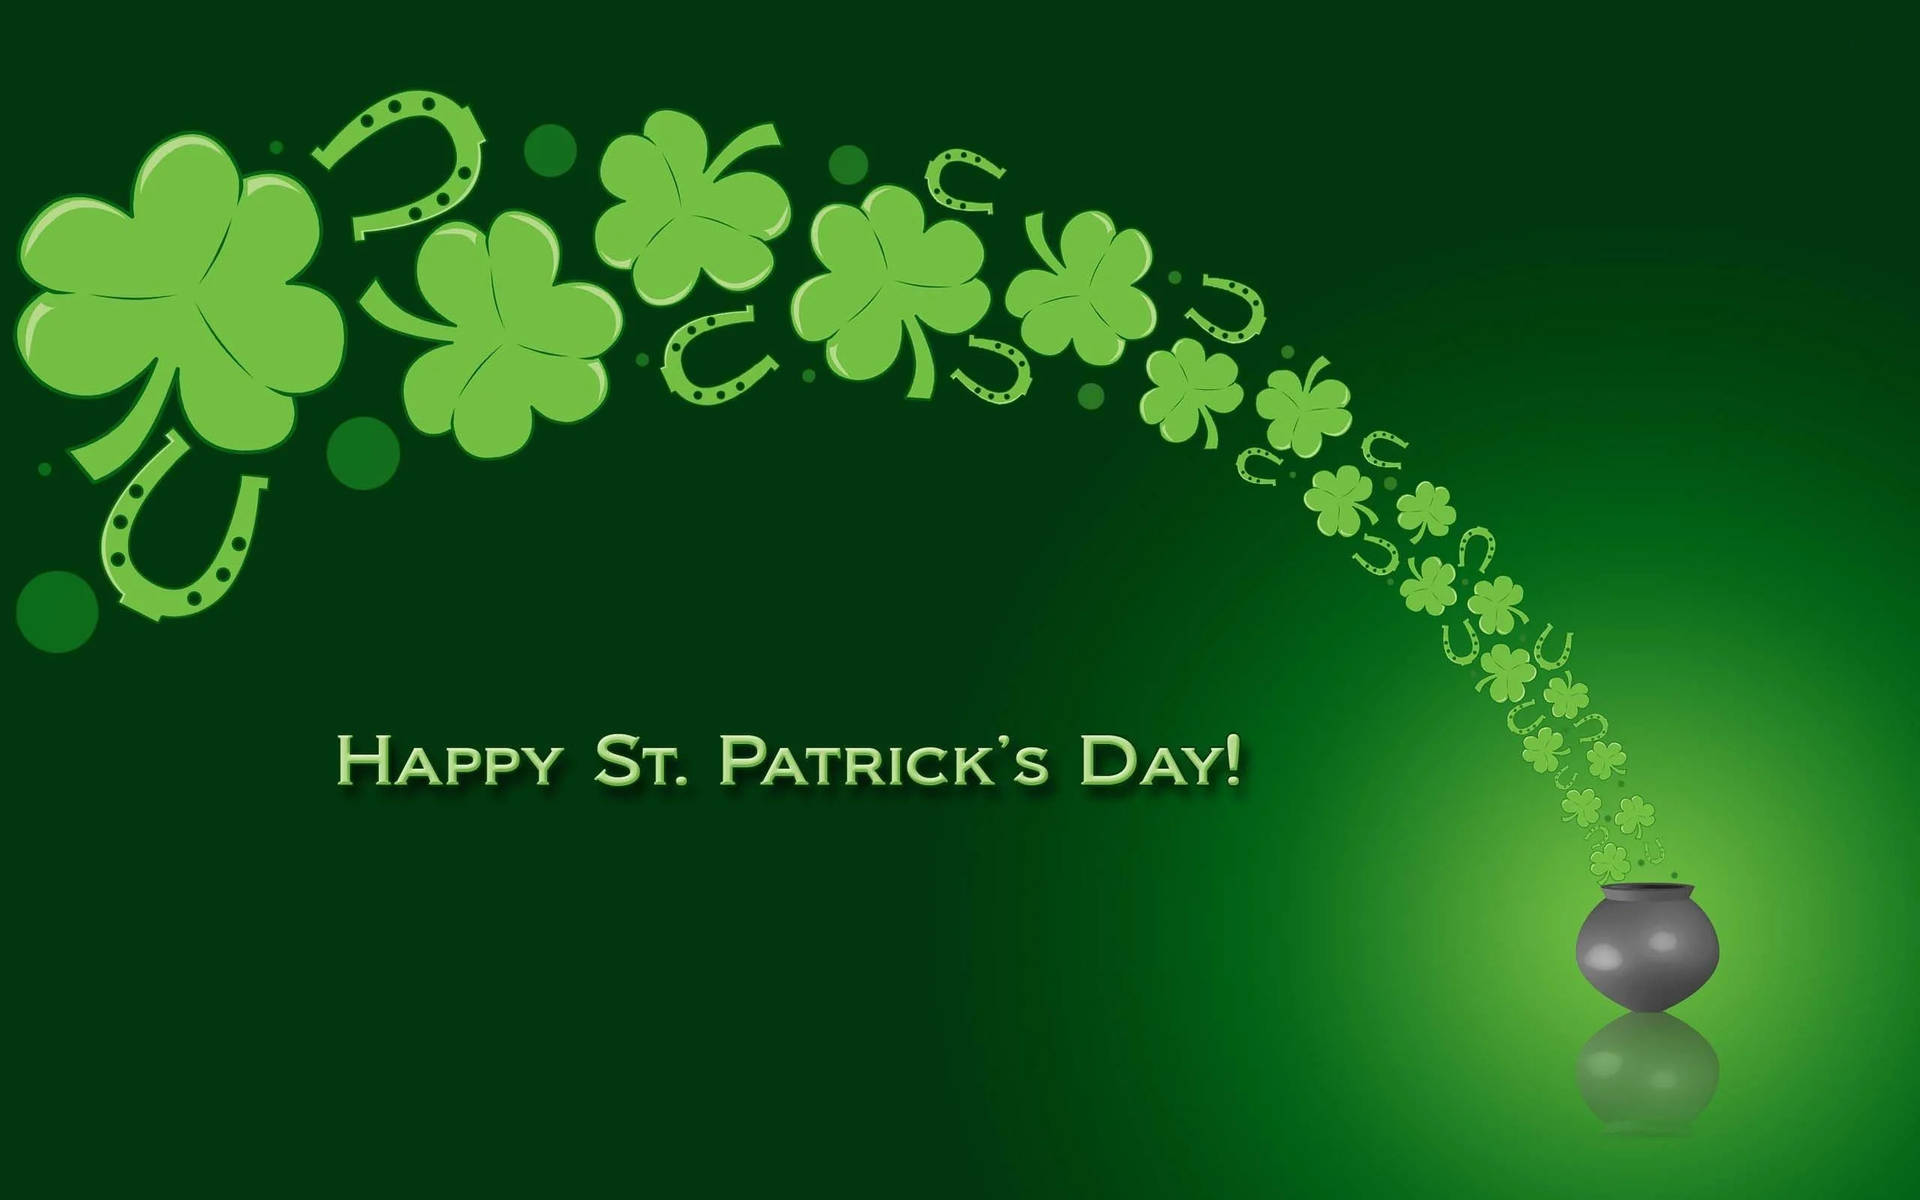 Saint Patrick’s Day With Pot Of Clovers Wallpaper